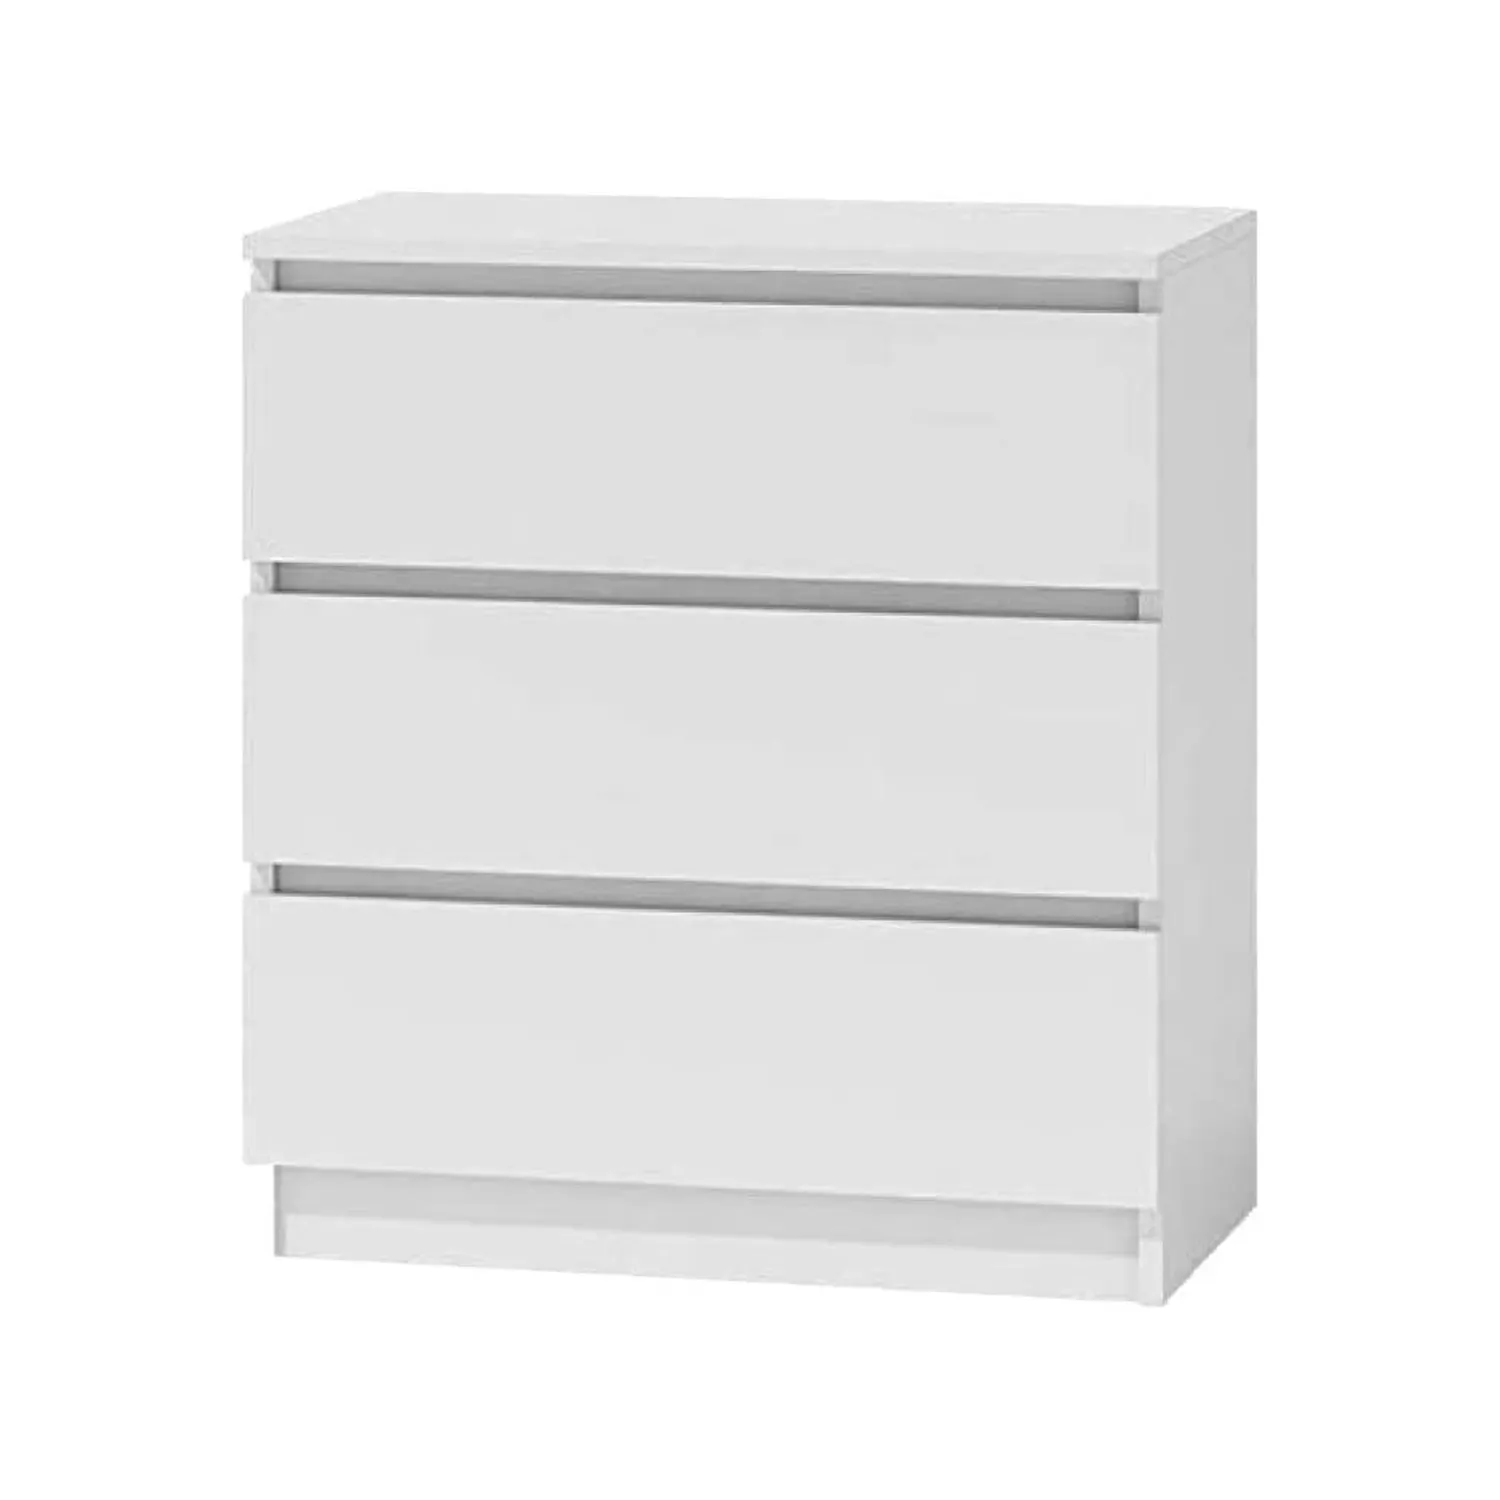 Easy To Assemble New Design Storage Cabinet 3 Drawers Rolling Chest Of Drawers For Home